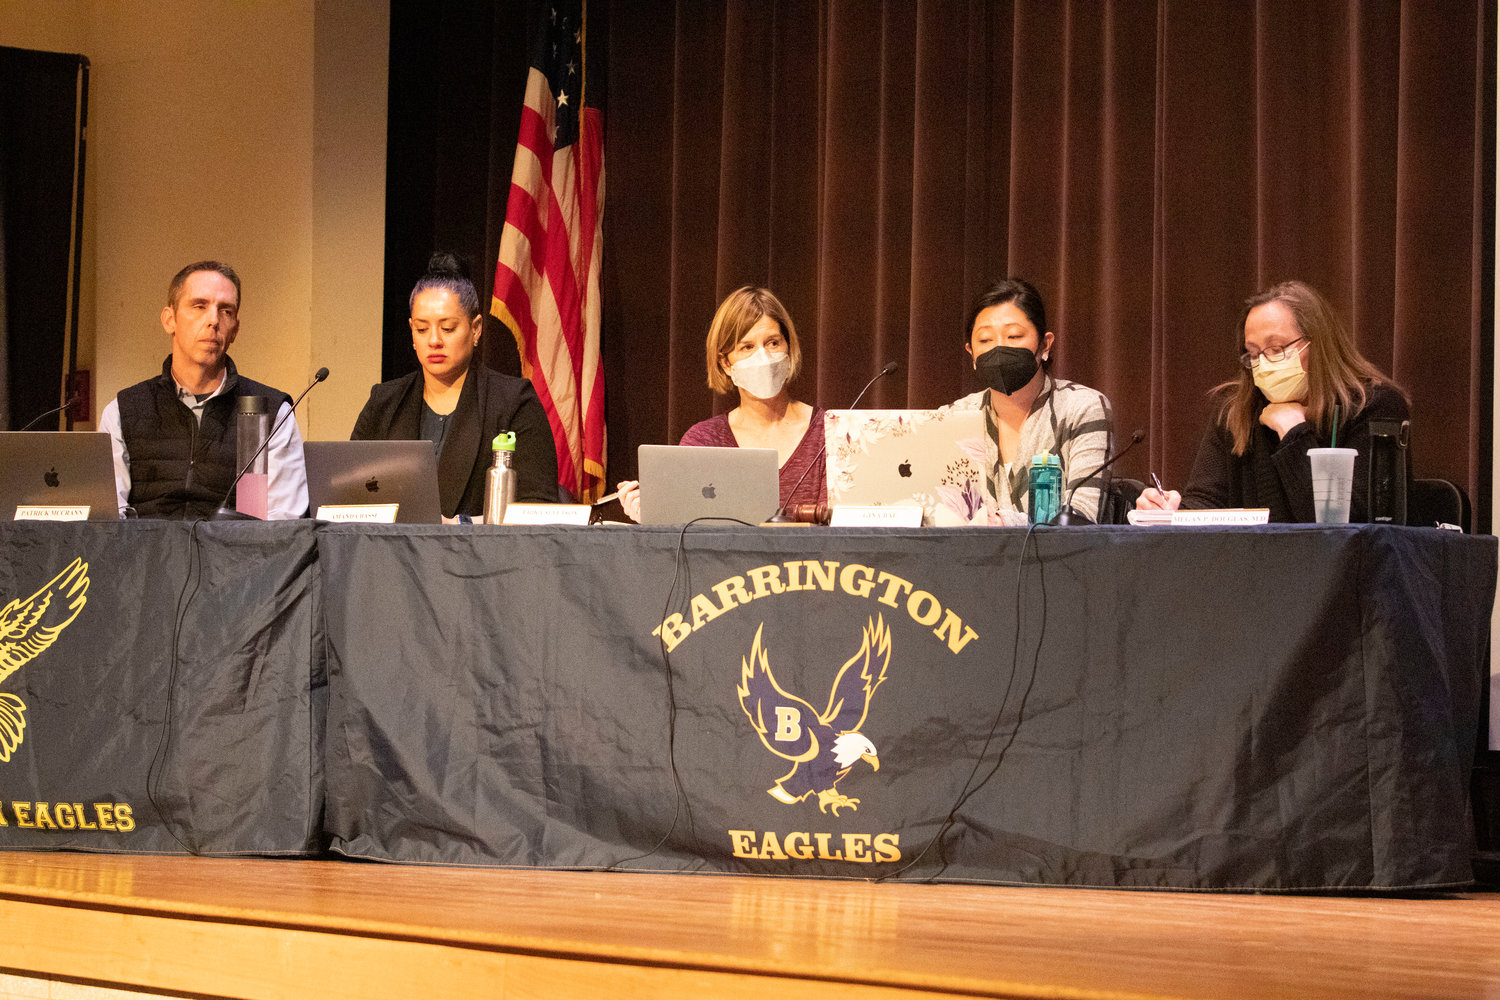 Members of the Barrington School Committee are shown during Wednesday night’s meeting. They are (from left to right) Patrick McCrann, Amanda Basse, Erika Sevetson, Gina Bae and Megan Douglas.